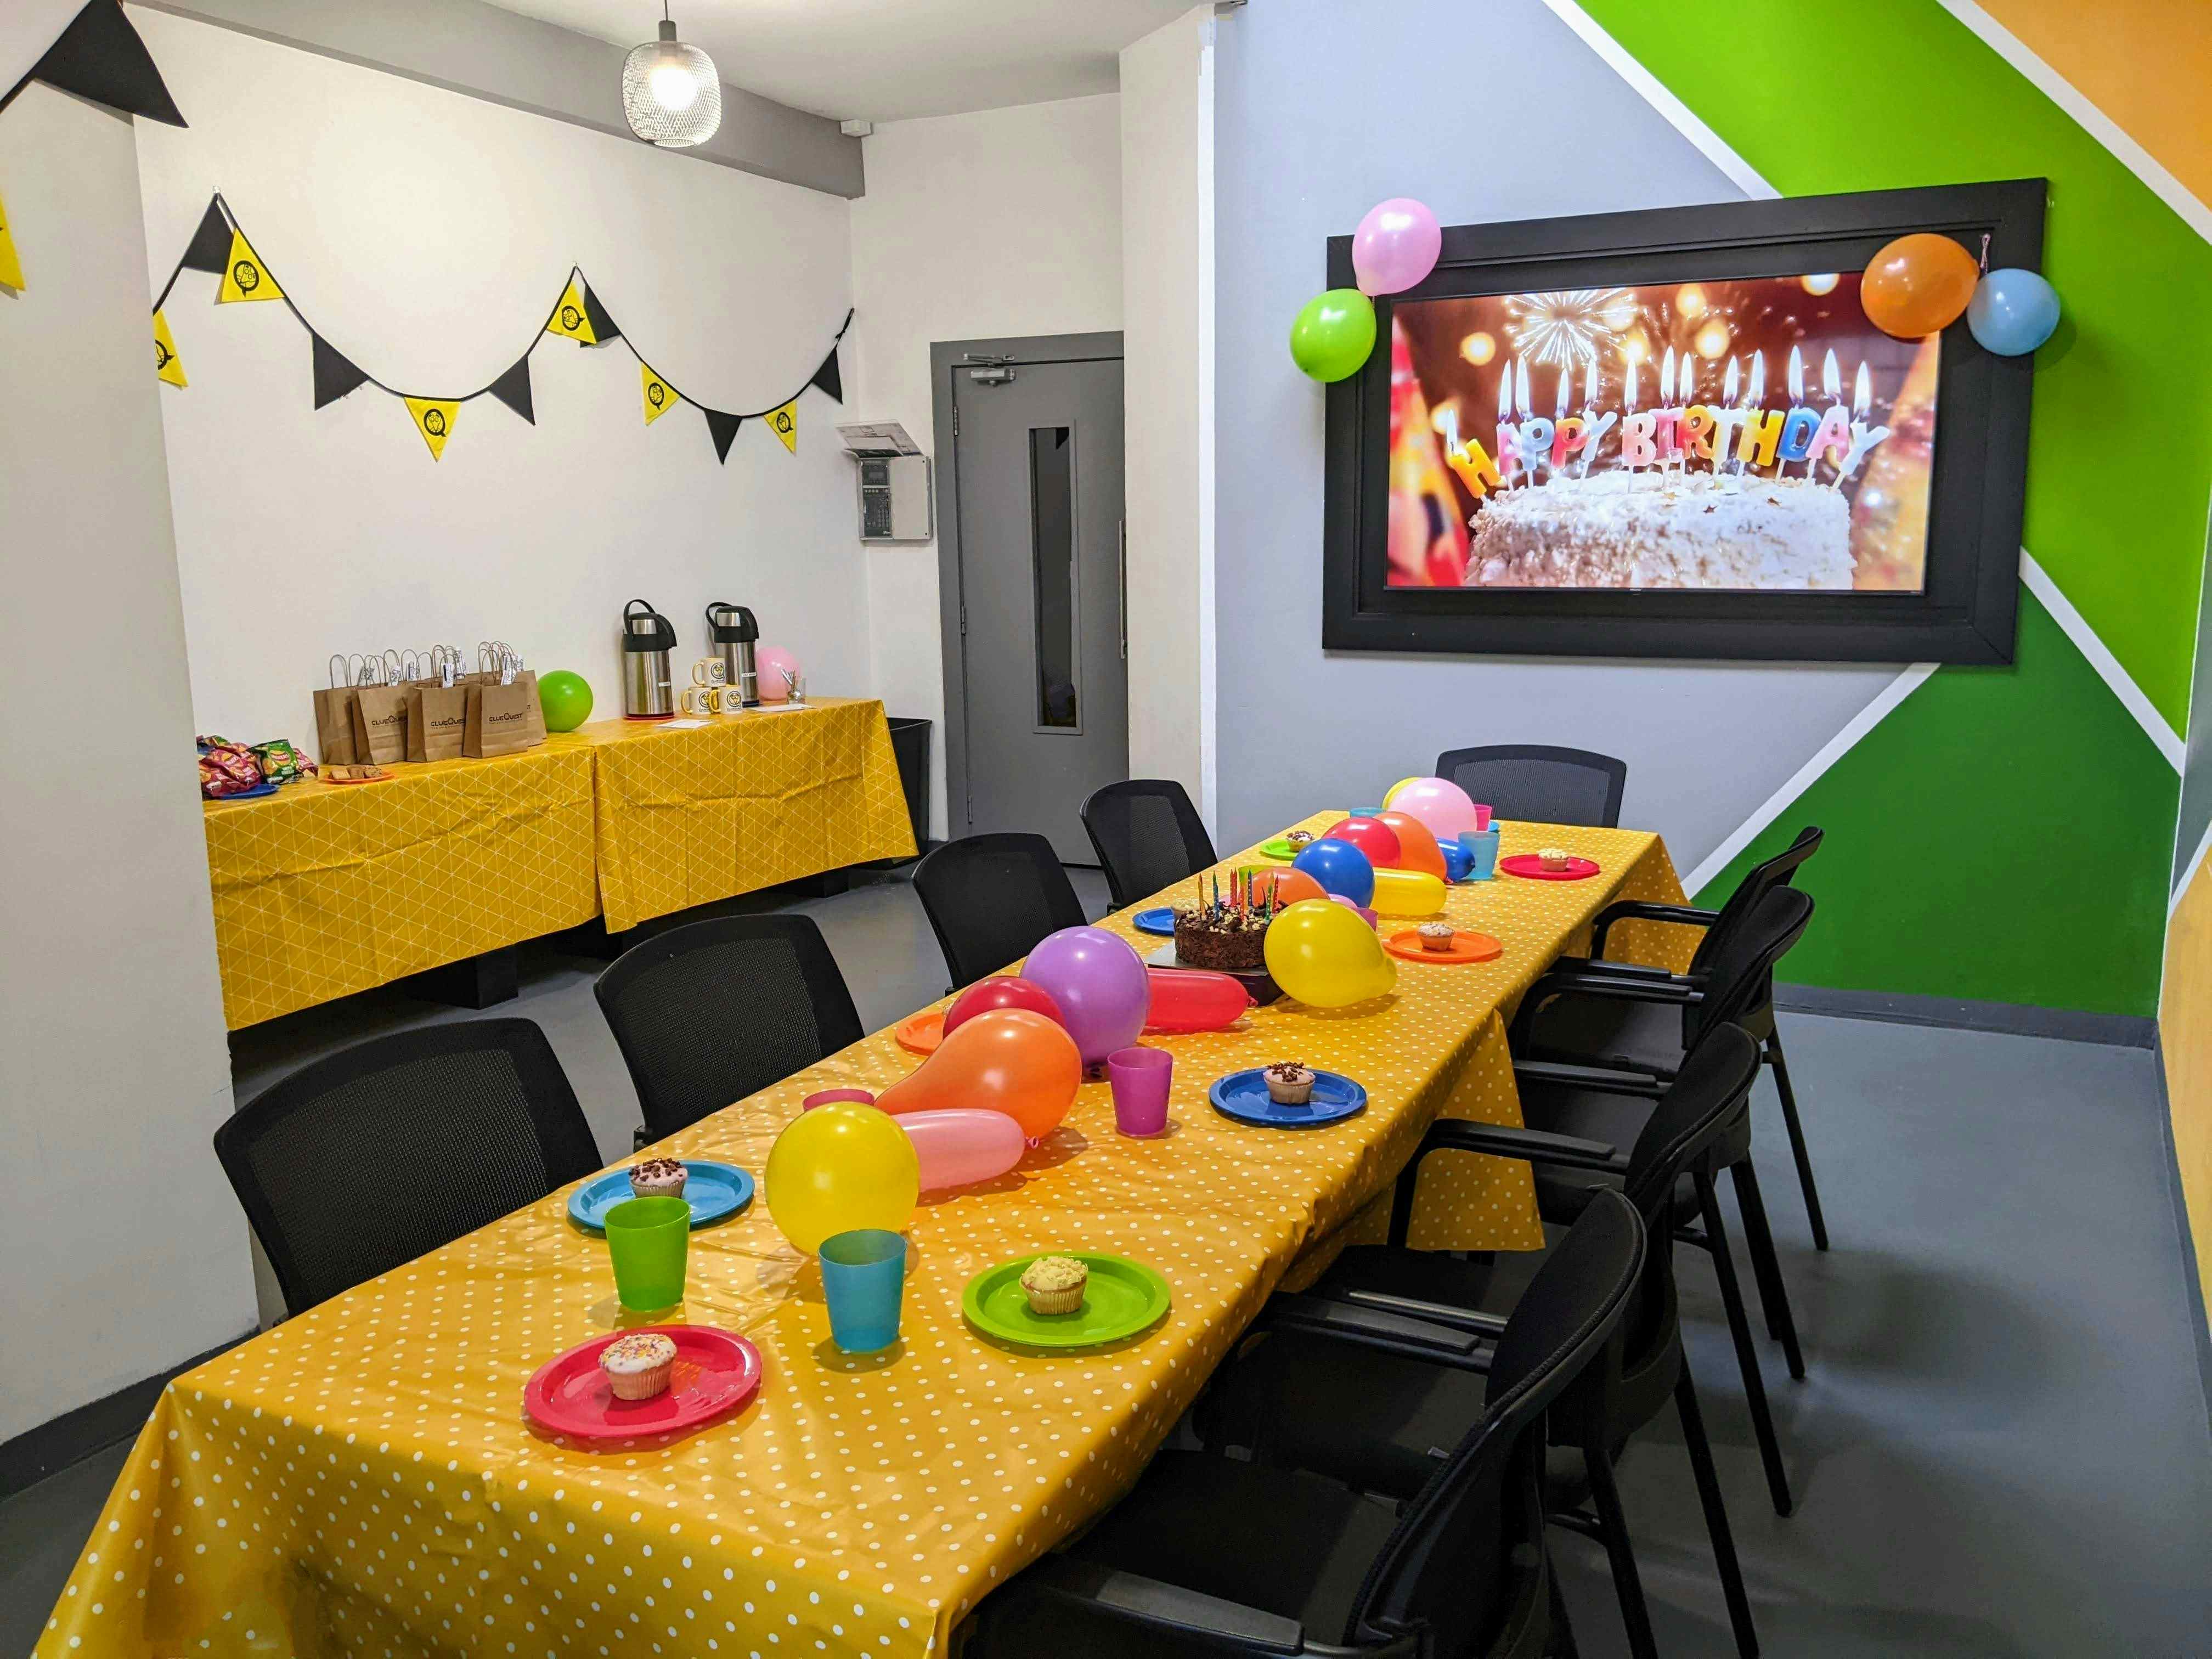 Apollo Room - Birthday Party Space, clueQuest - Escape Games and Meeting Spaces